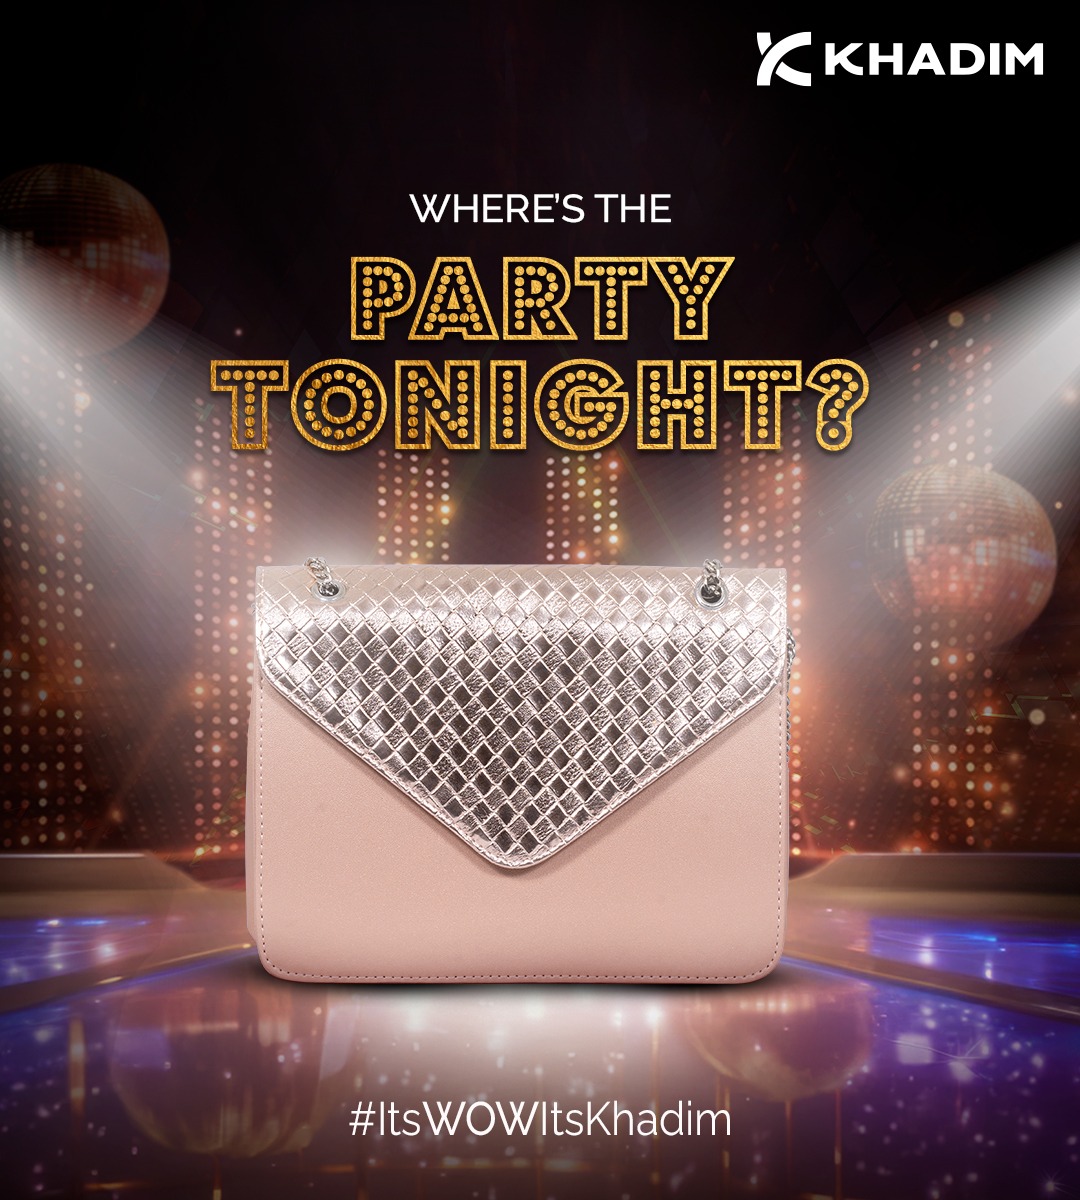 No party is complete without the showstopper 🥳

Visit your nearest Khadim store and add our stylish bags to your collection. 

#Khadims #ItsWOWItsKhadim #style #party